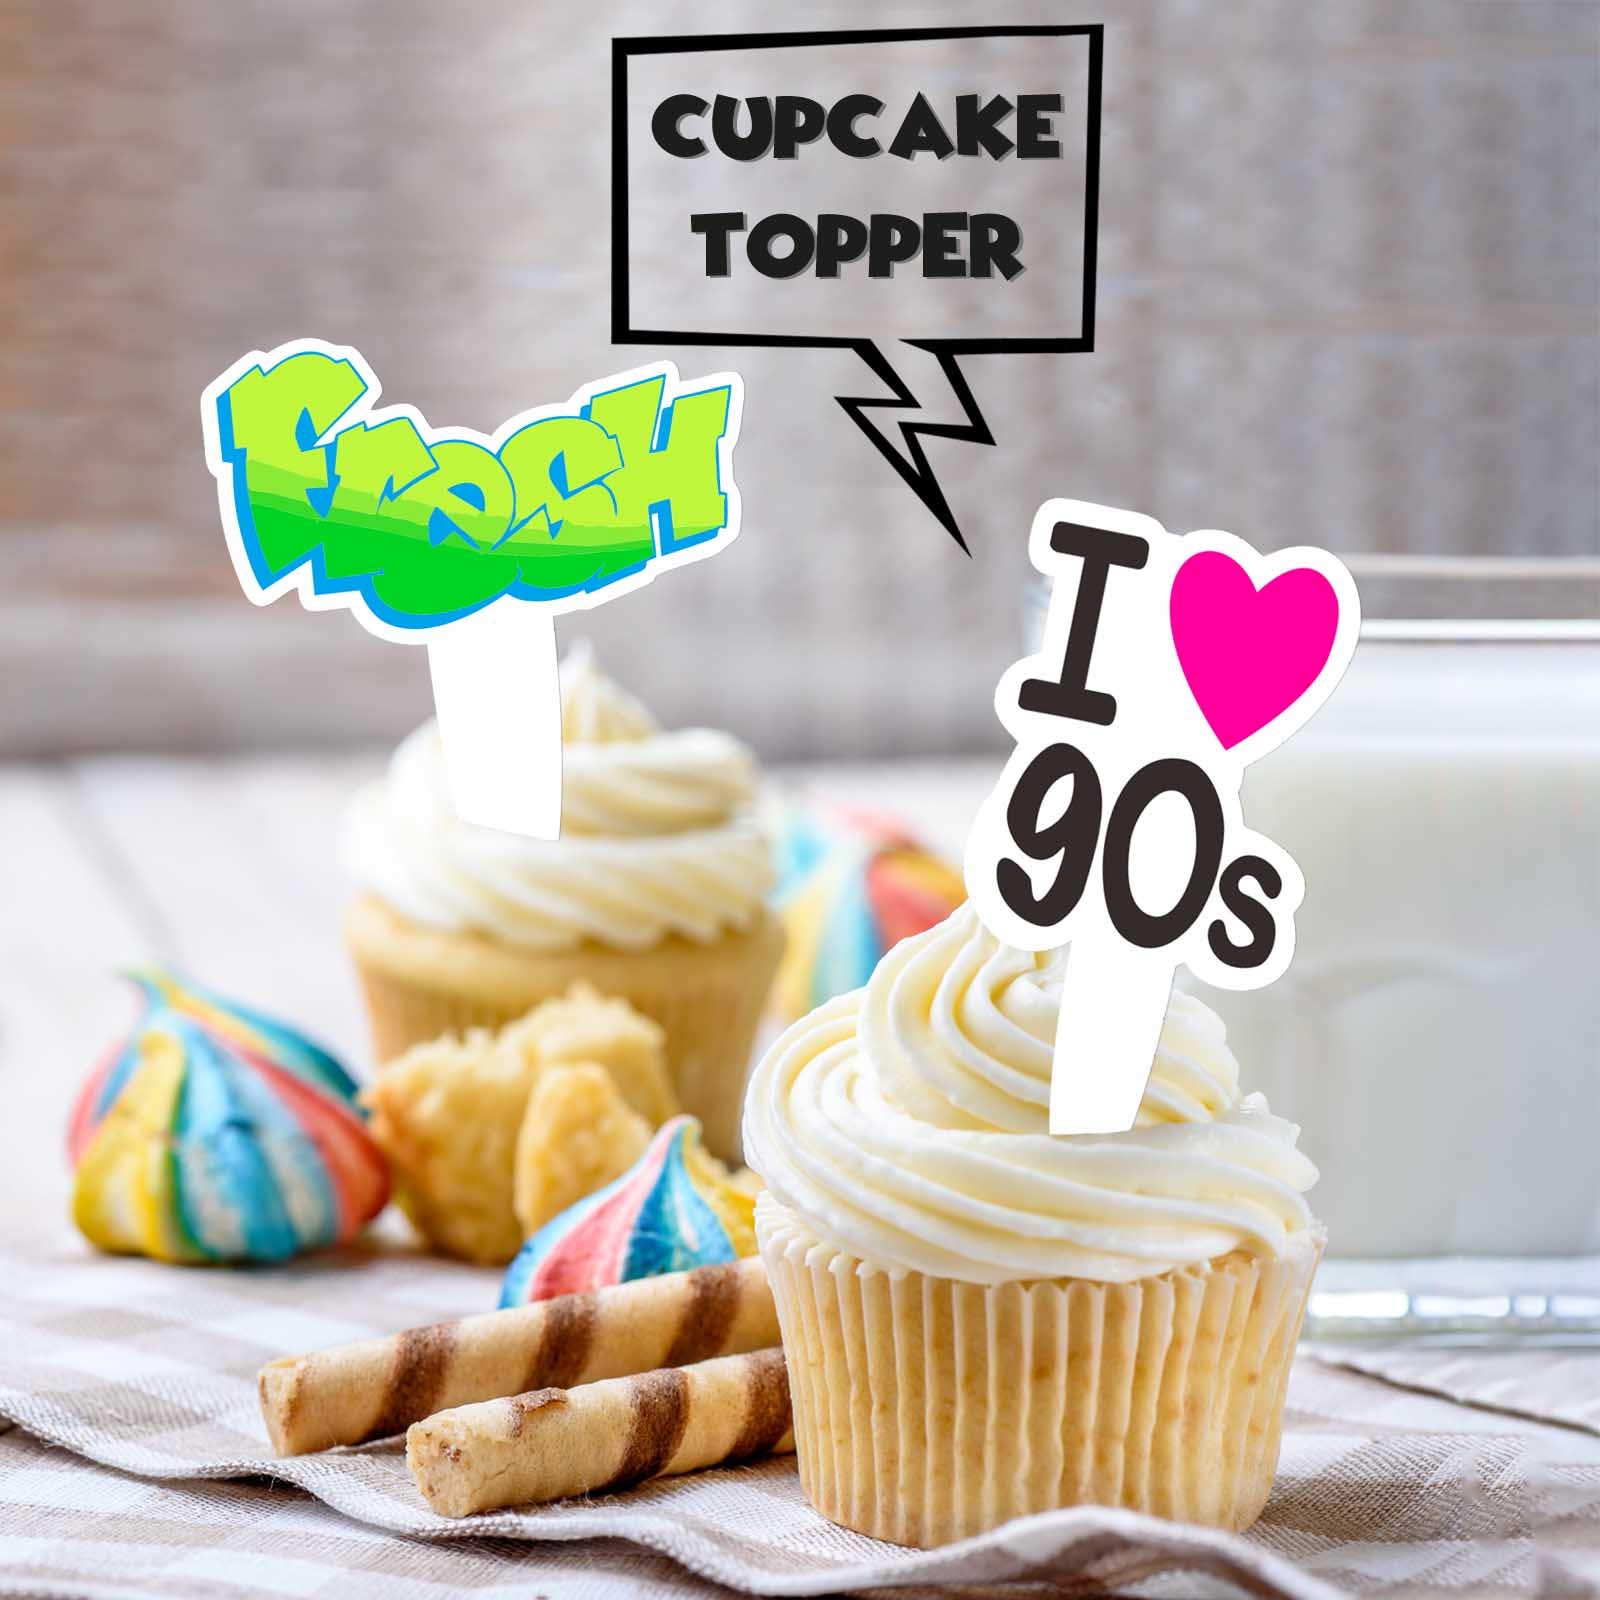 24pcs 90s Cupcake Topper 1990s Retro Theme Decor 90's Decade Throwback Party Decorations Supplies